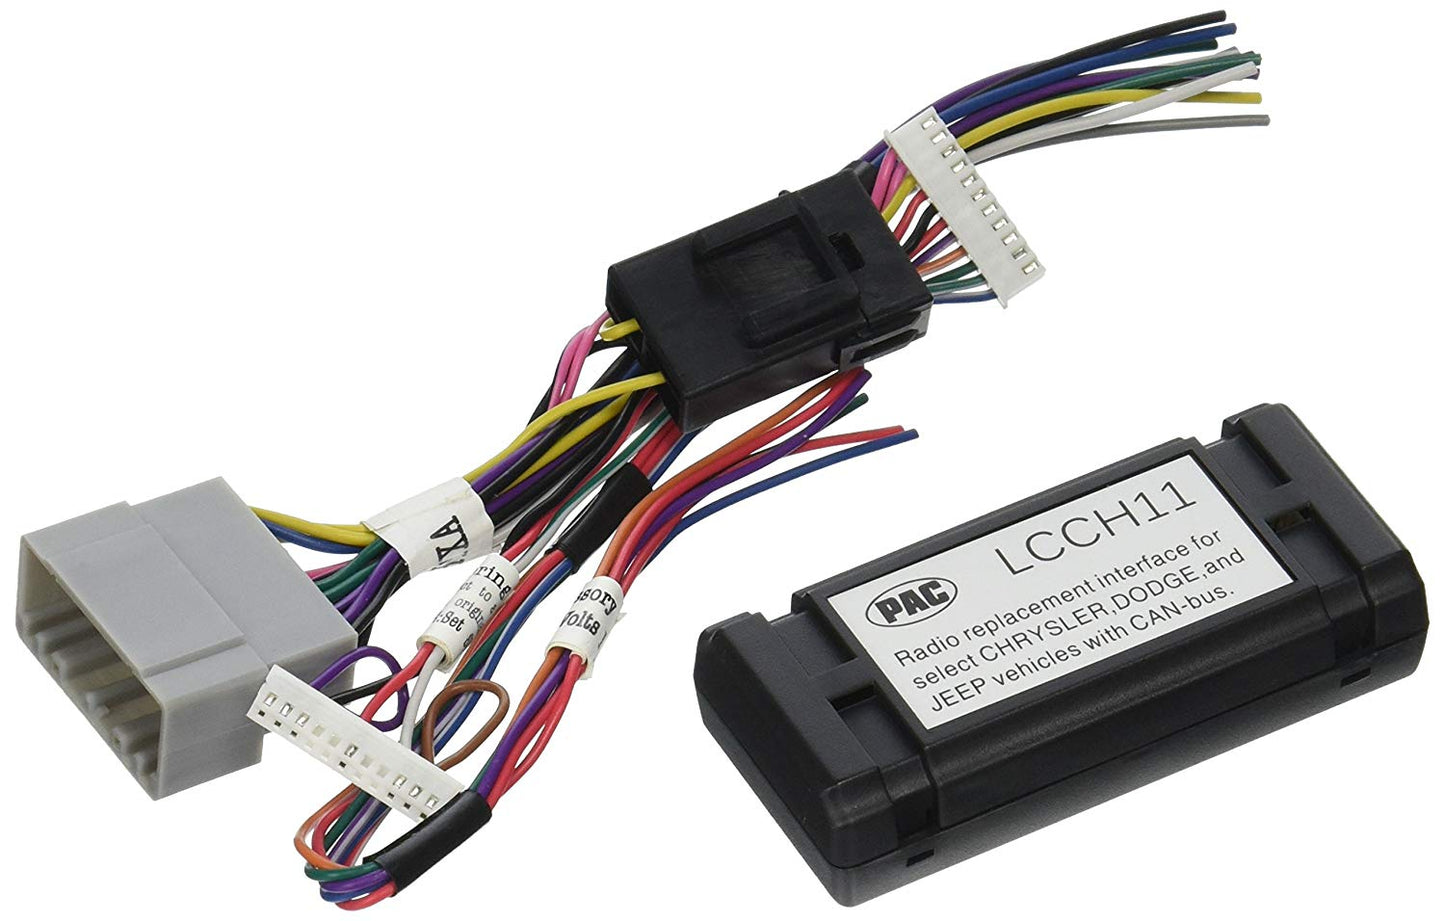 PAC LCCH11 Radio Replacement Interface for 2005-10 Dodge Chrysler Jeep